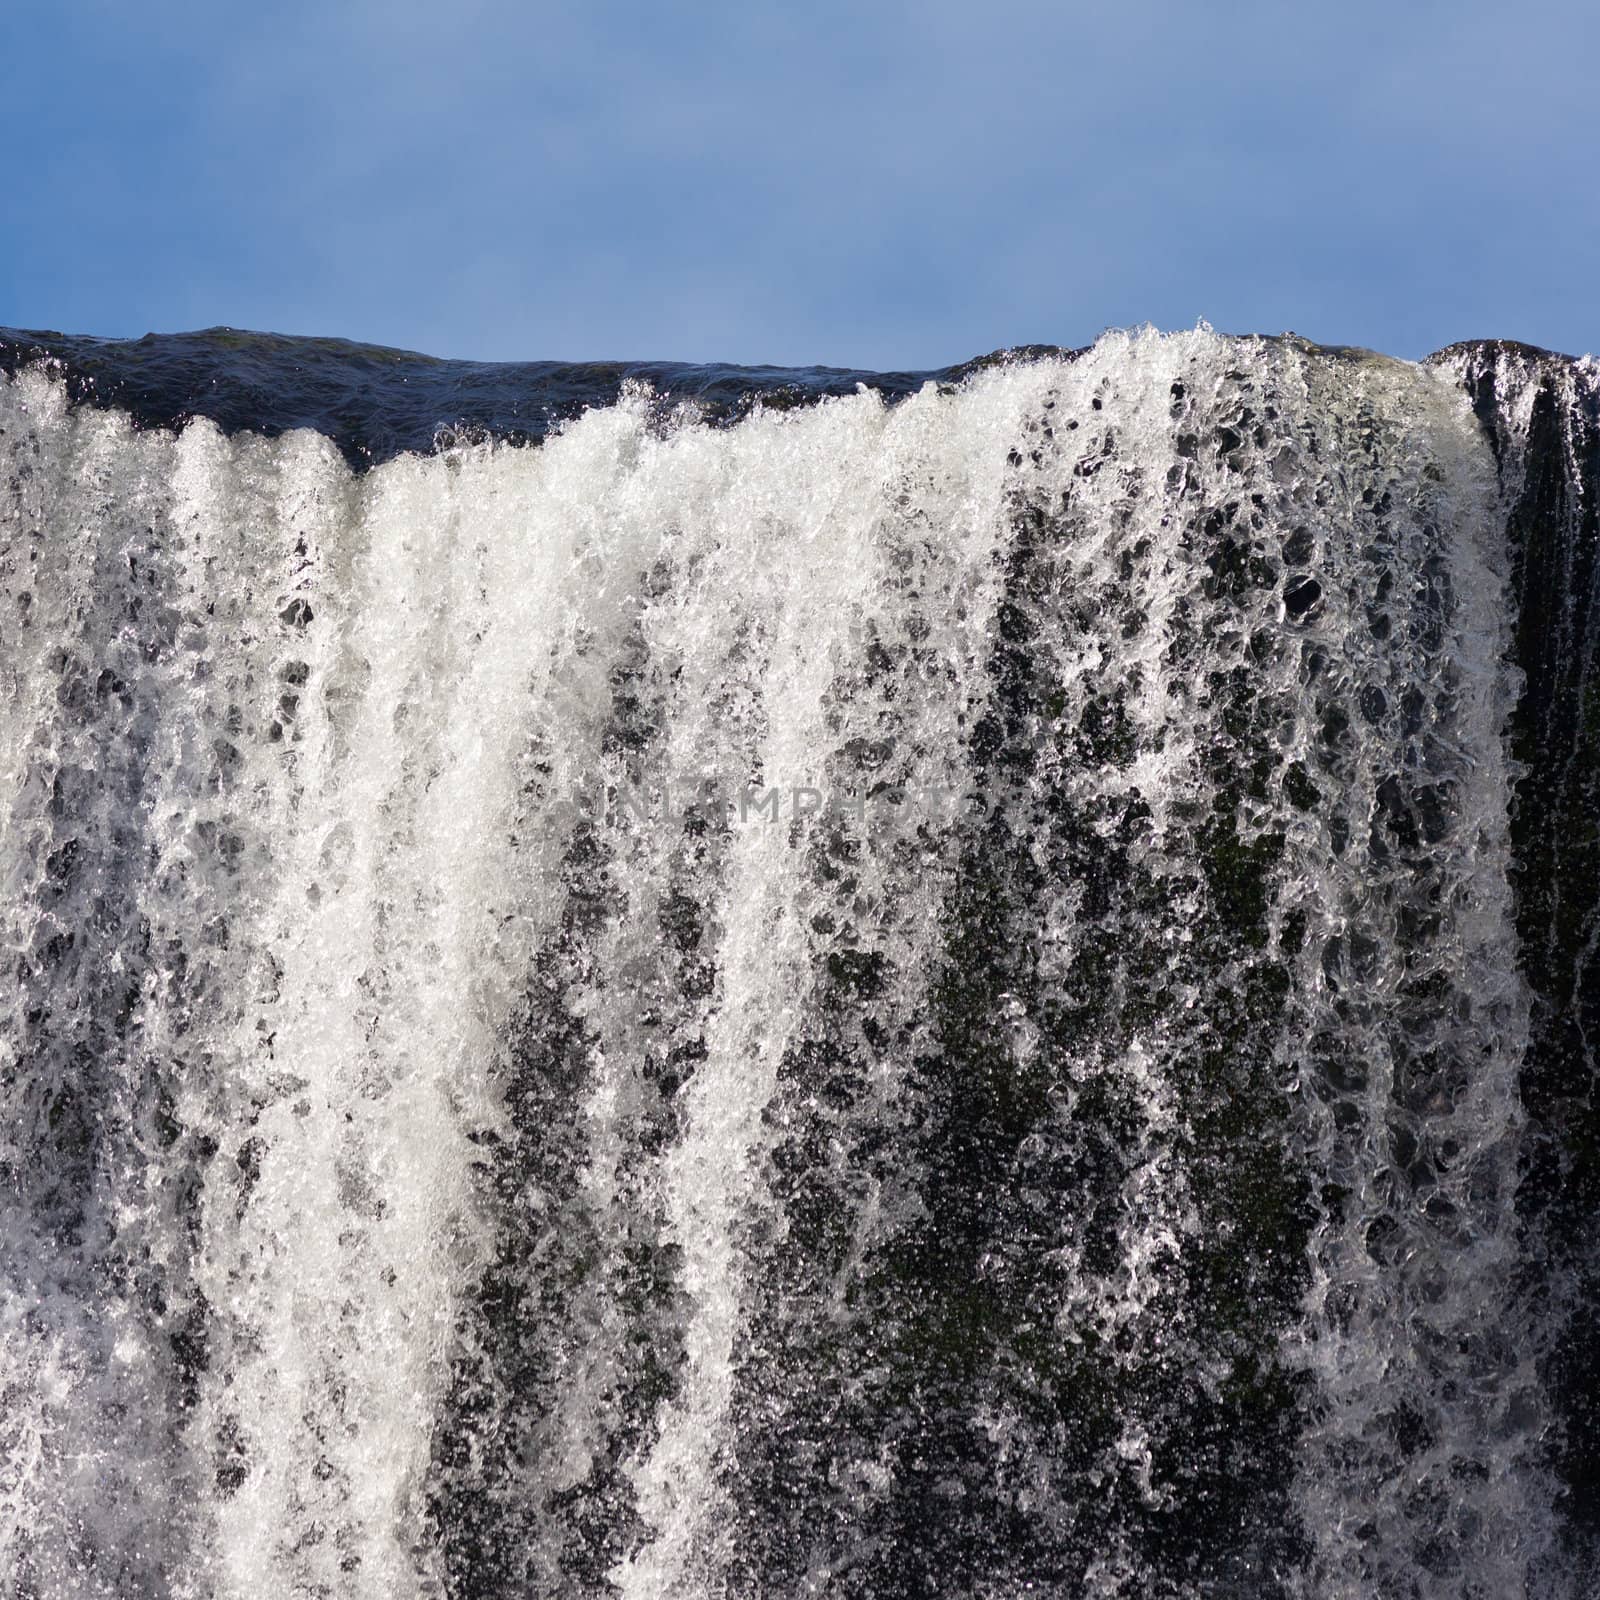 Closeup of clear clean water cascading over a high rocky edge creating a refreshing cool waterfall against blue sky